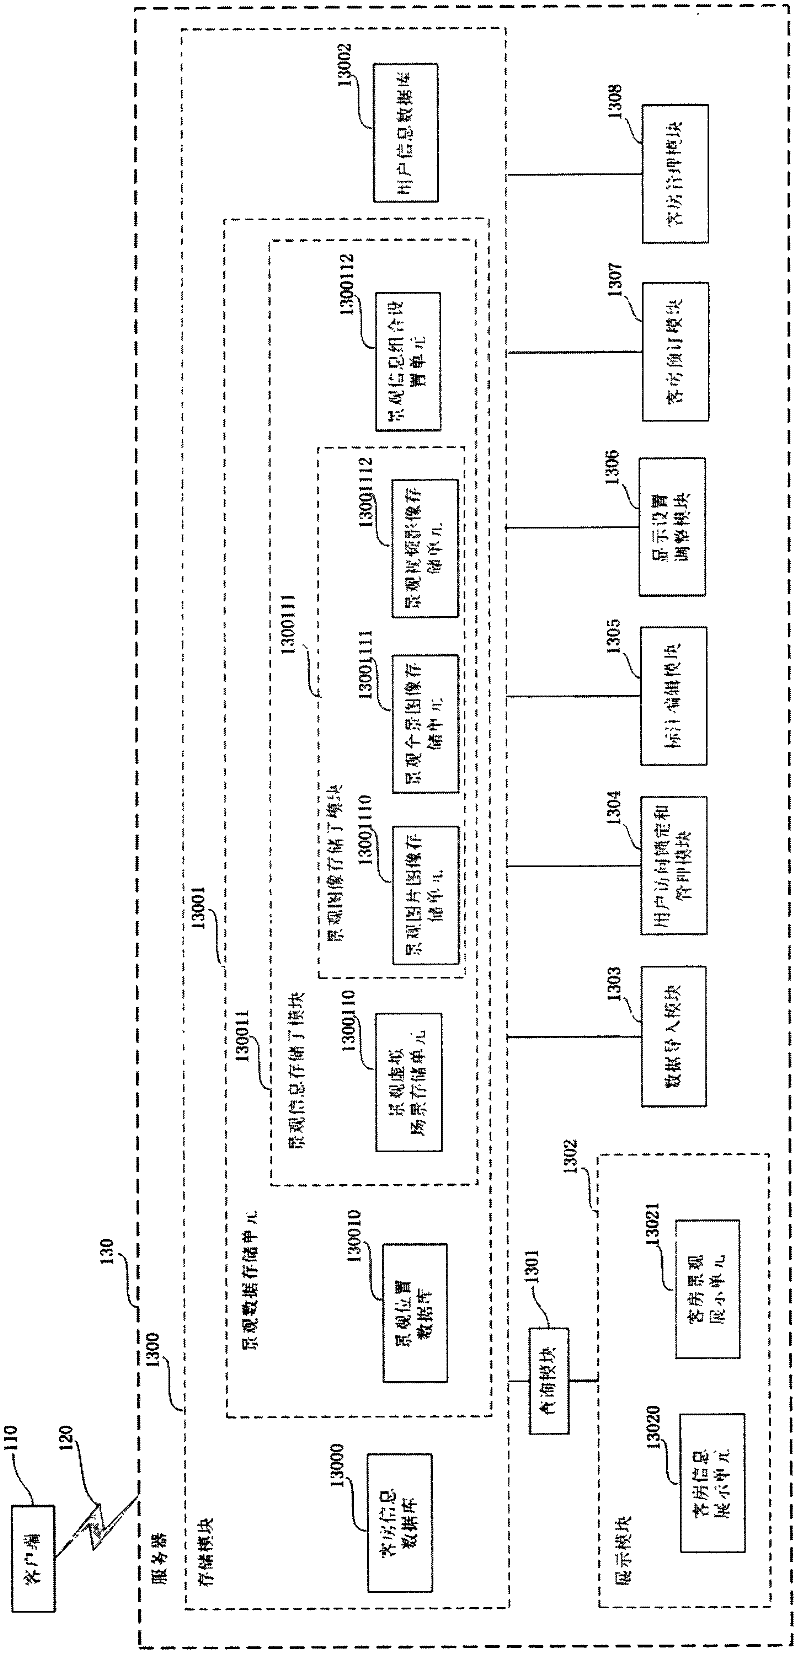 Hotel room outdoor landscape display system and method and data generation system and method